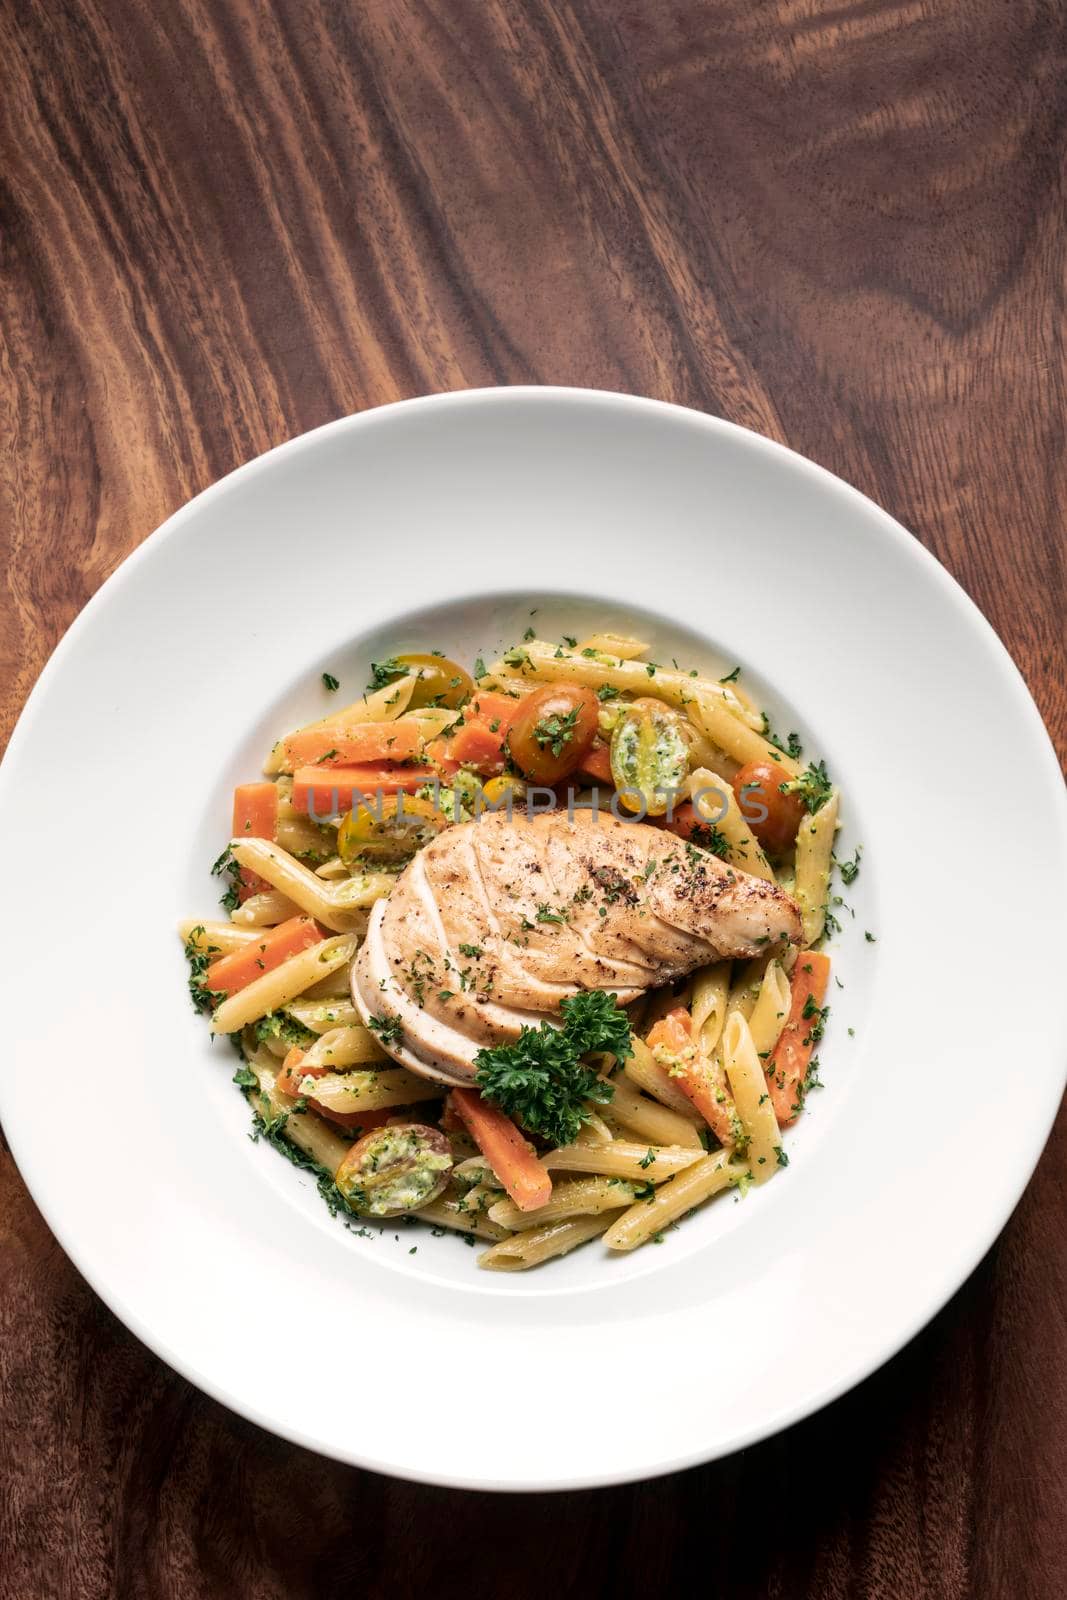 fried chicken breast with penne and saute vegetables pasta dish on wood table background